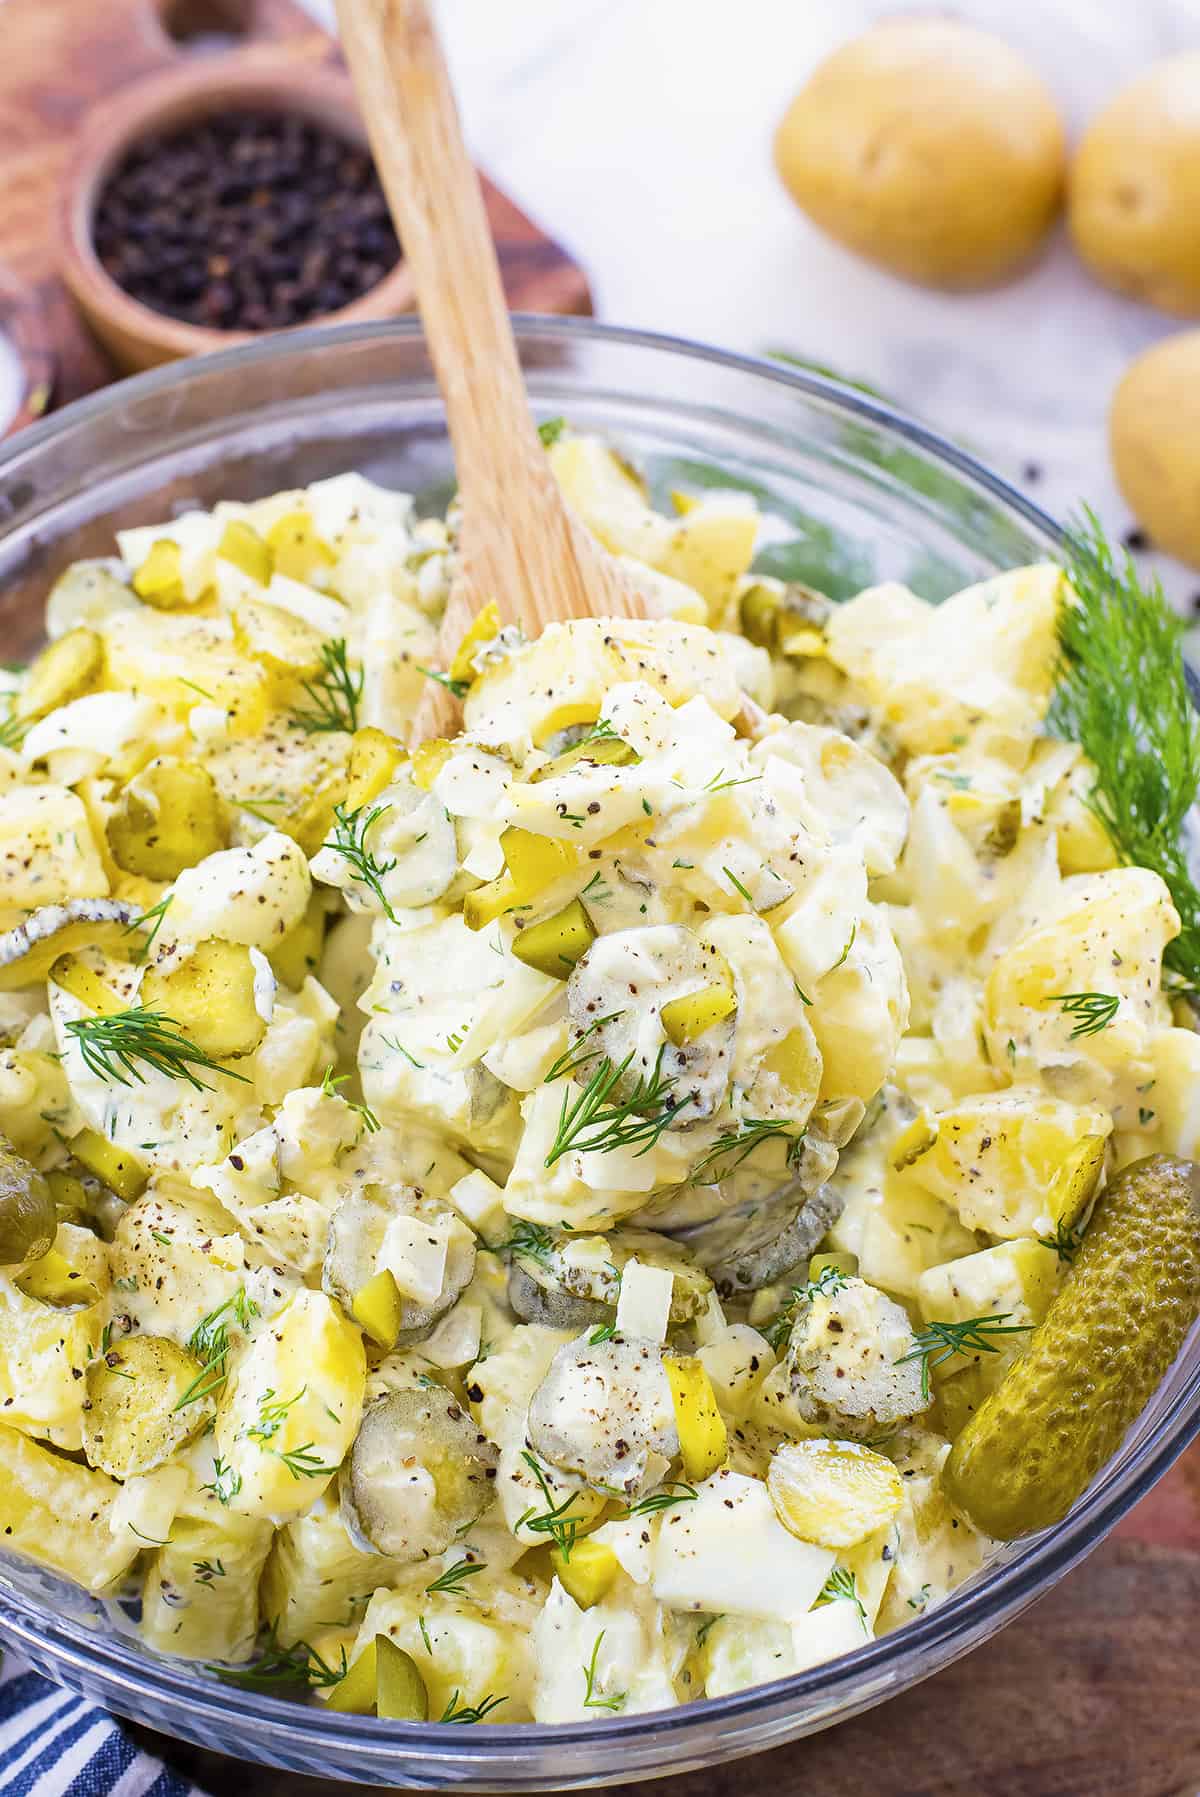 Potato salad with dill pickles in glass bowl.